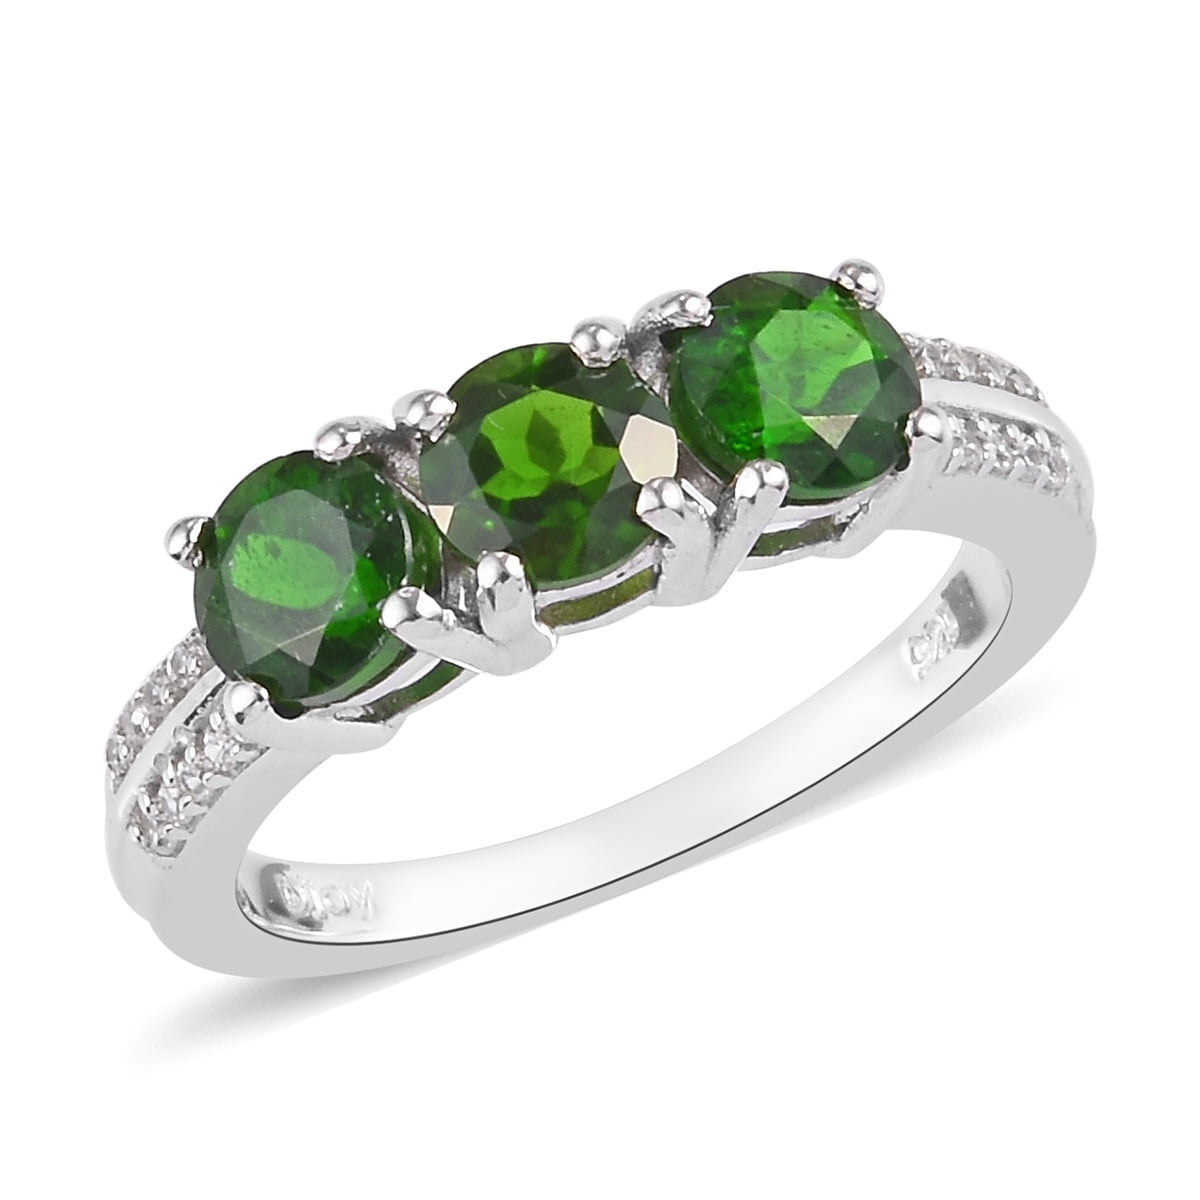 925 Sterling Silver Platinum Over Chrome Diopside Ring Jewelry Size 8 Ct 1.4